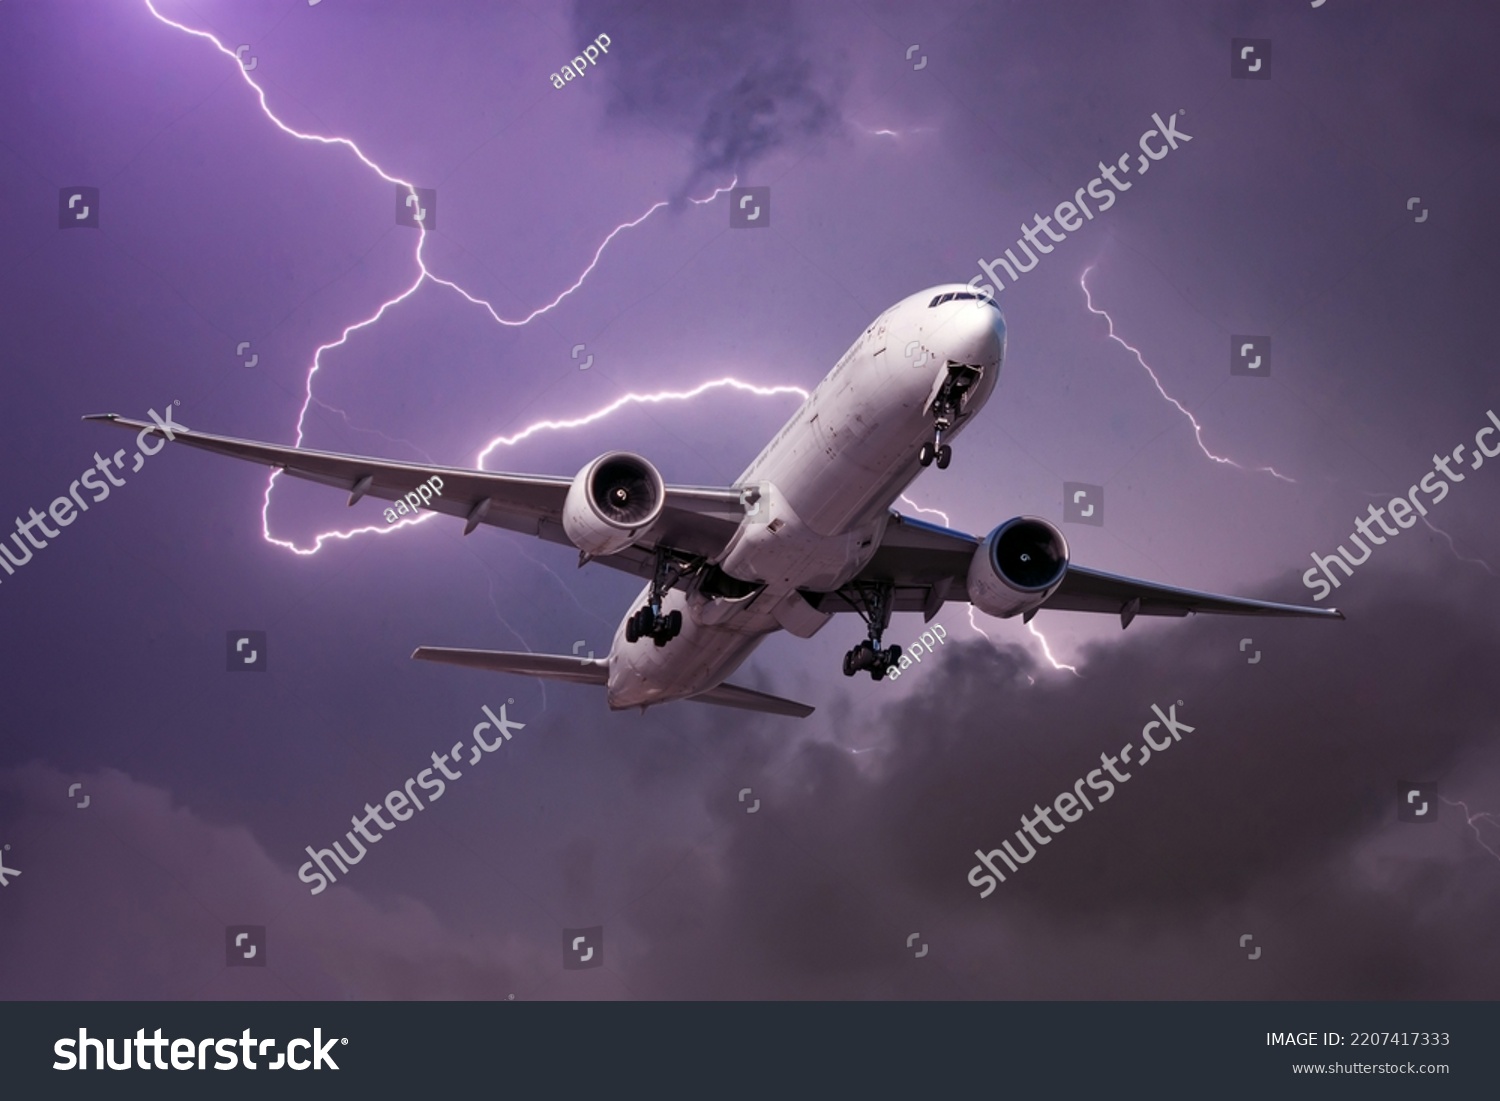 Landing airliner during a strong wind in a storm against the backdrop of a flash of lightning #2207417333